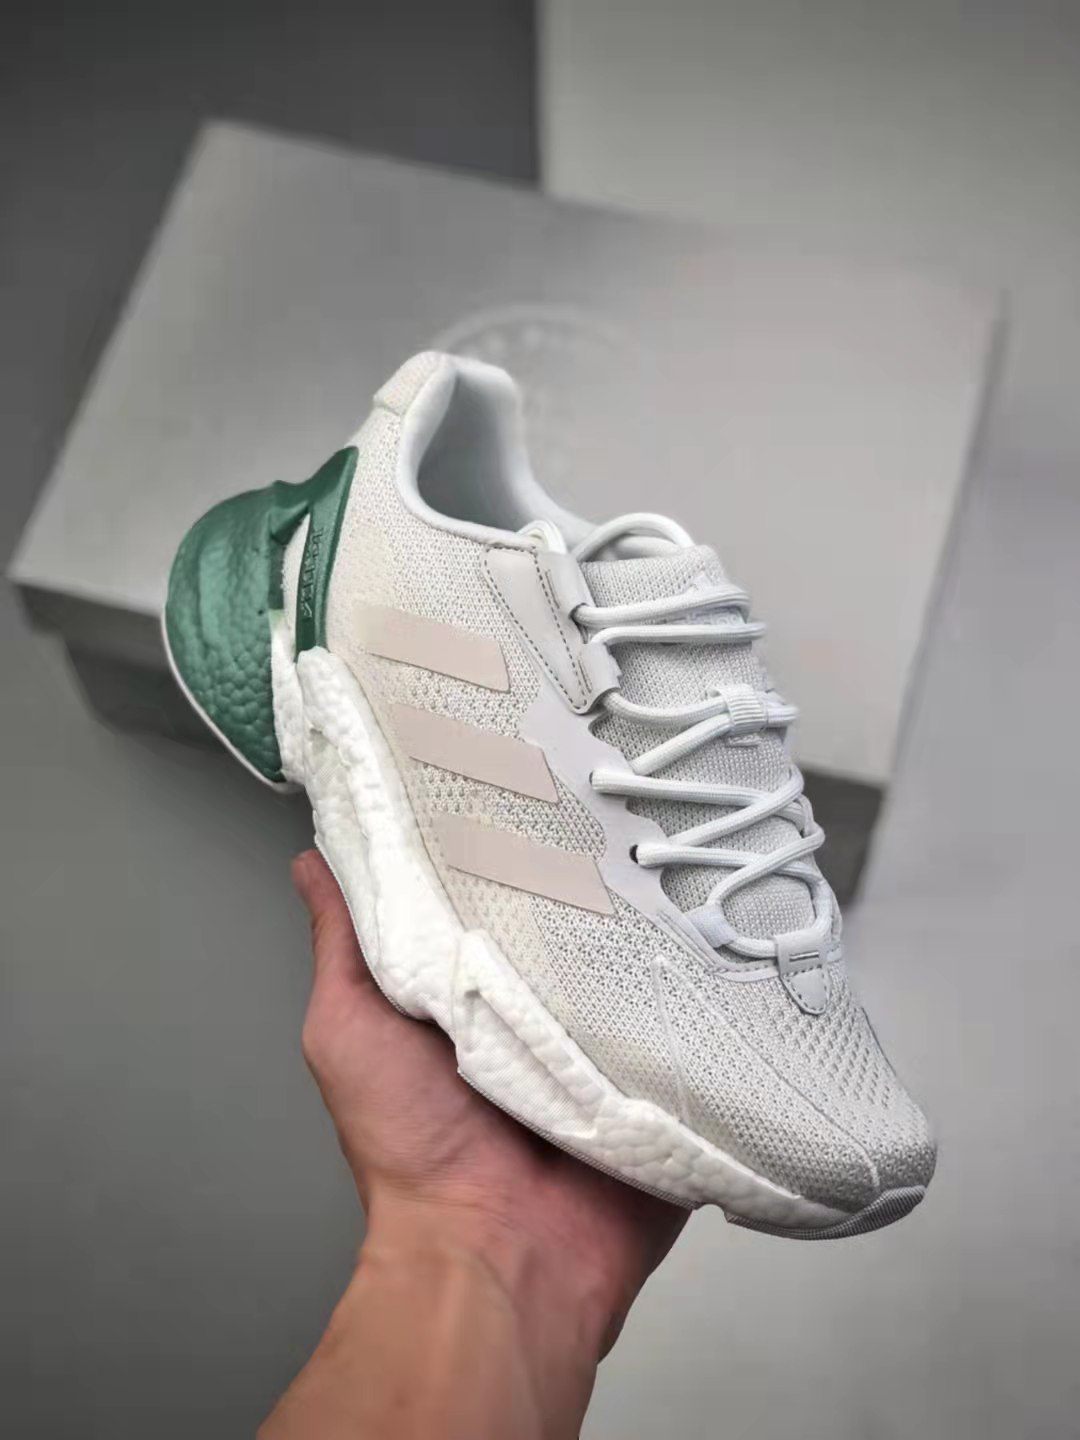 Adidas X9000L4 White Metallic Green GX3486 - Stylish and Comfortable Athletic Shoes